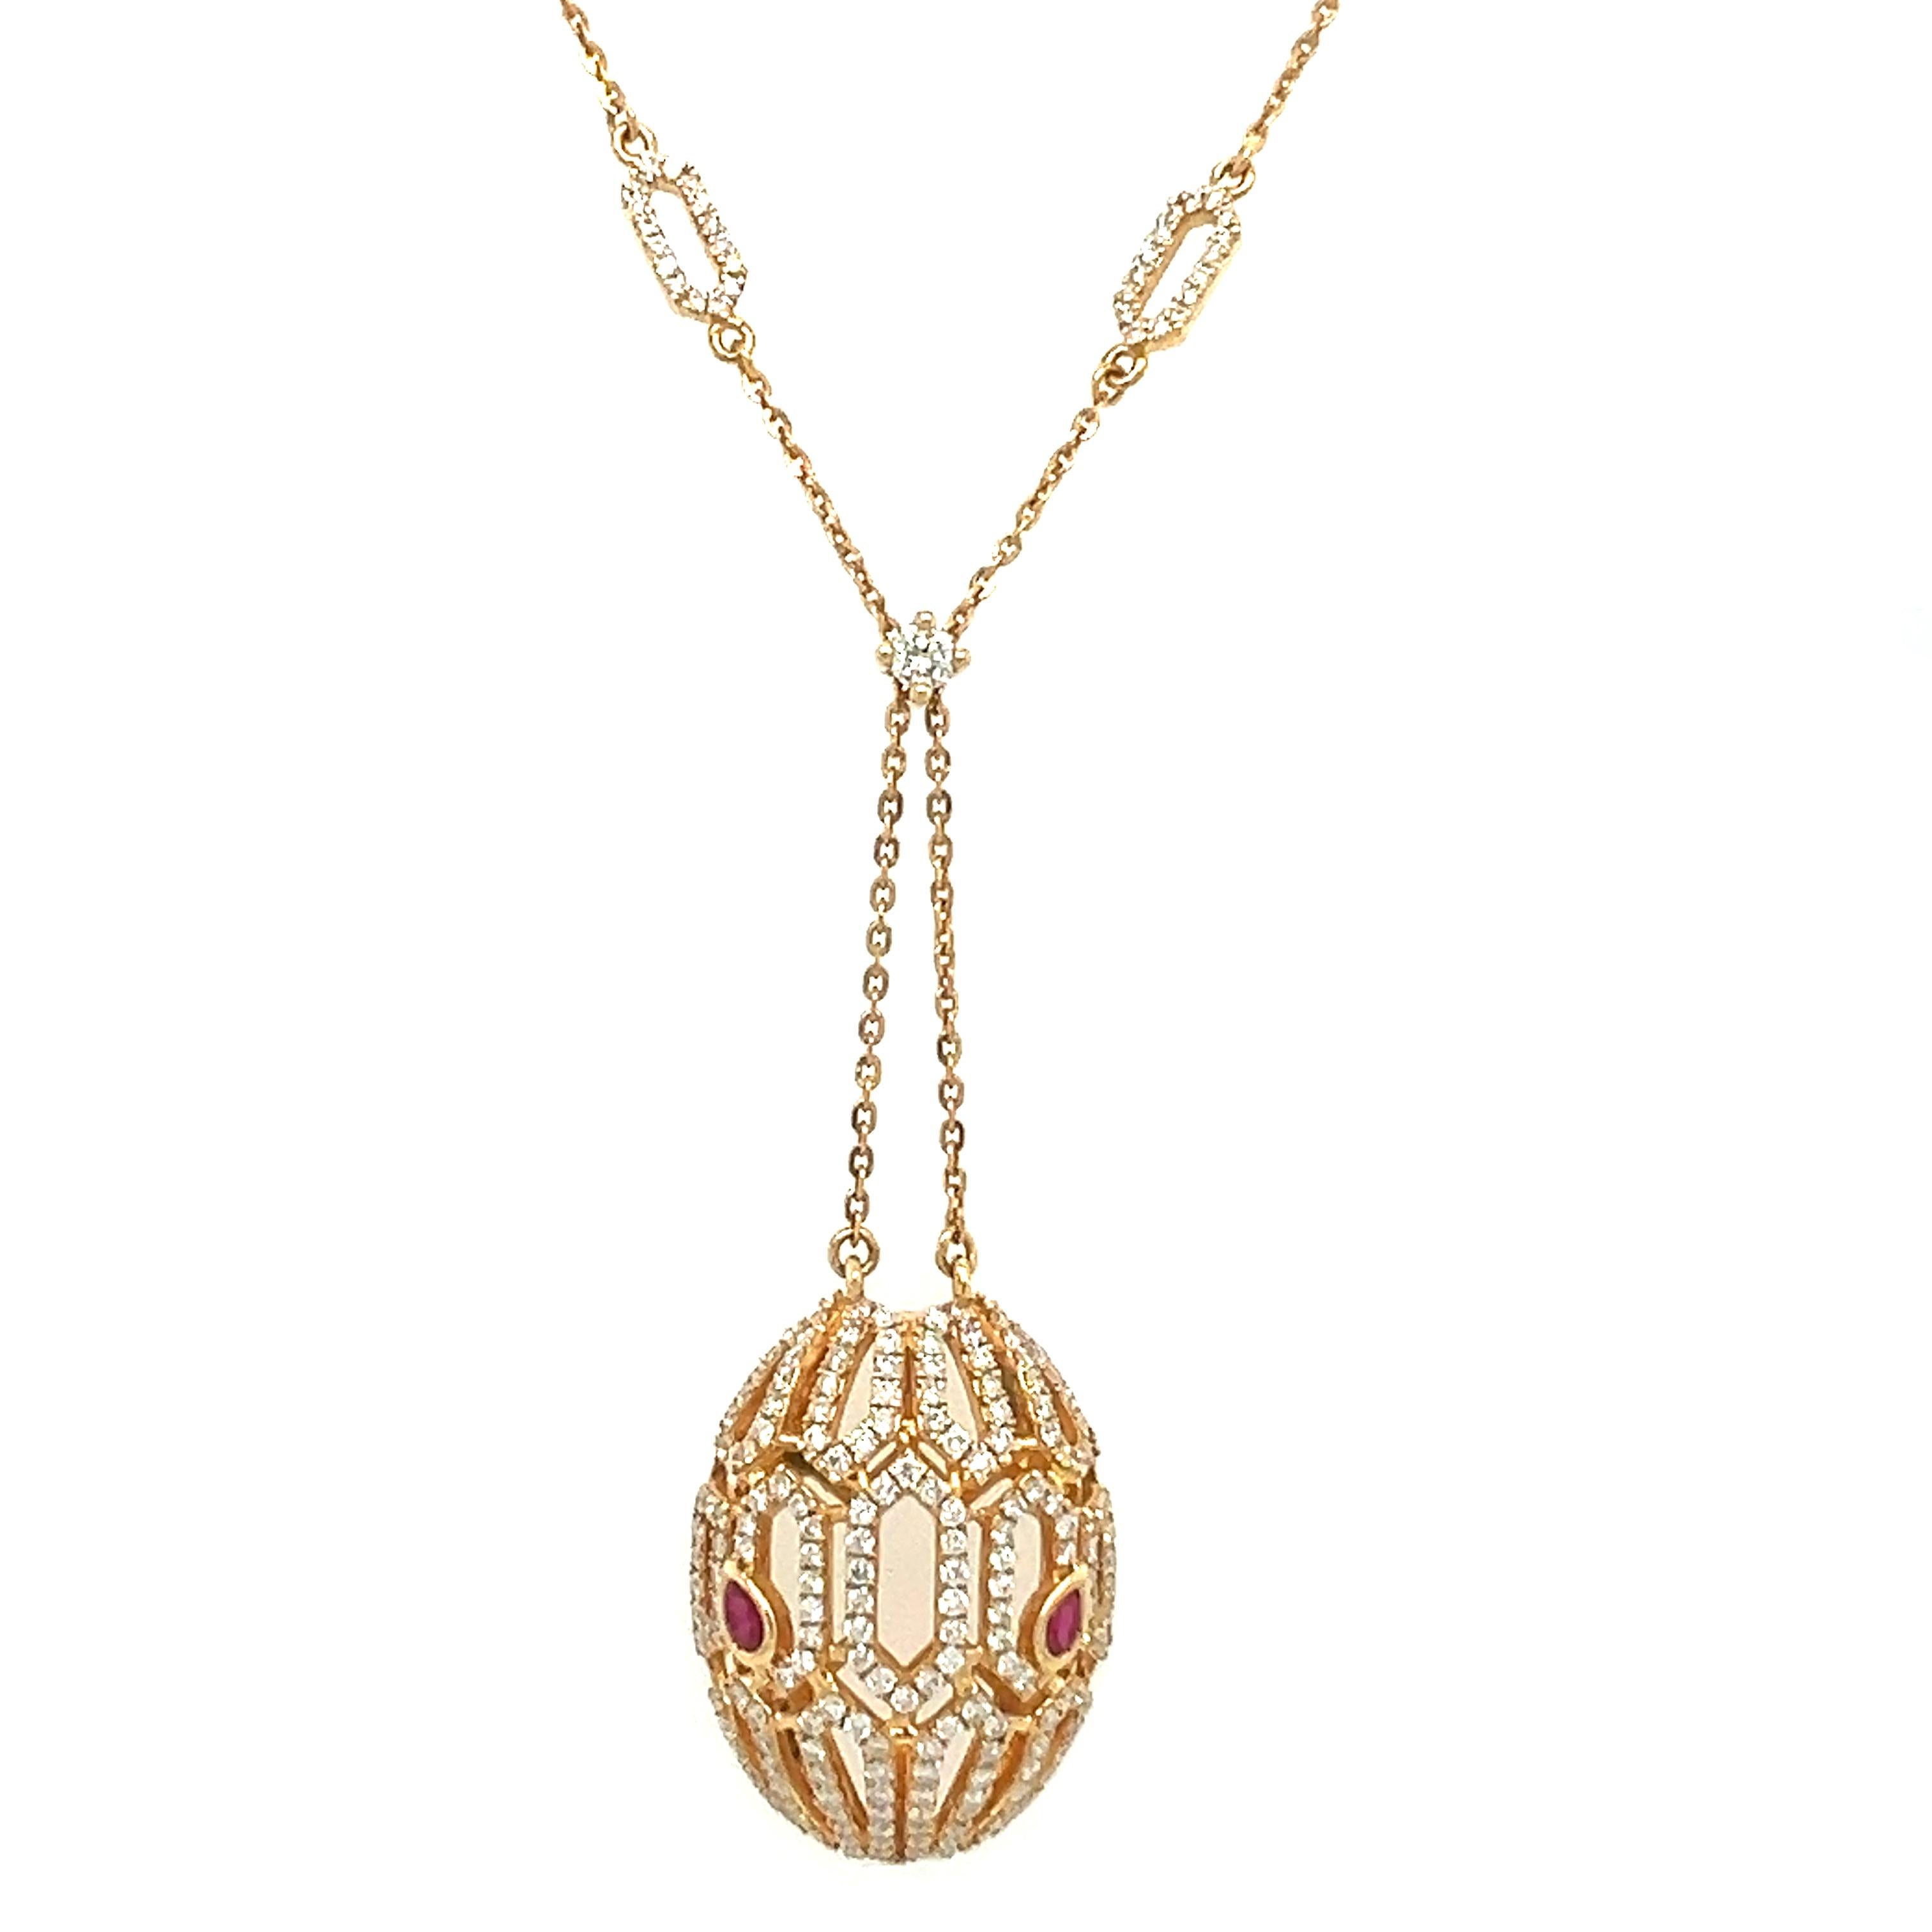 An 18-karat yellow gold necklace set with a natural 0.18-carat Ruby and 1.25-carat diamonds. This lovely, sophisticated necklace with an adjustable catch. The necklace is 18 inches long, but you may modify the size to make it 17, or 18 inches long. 